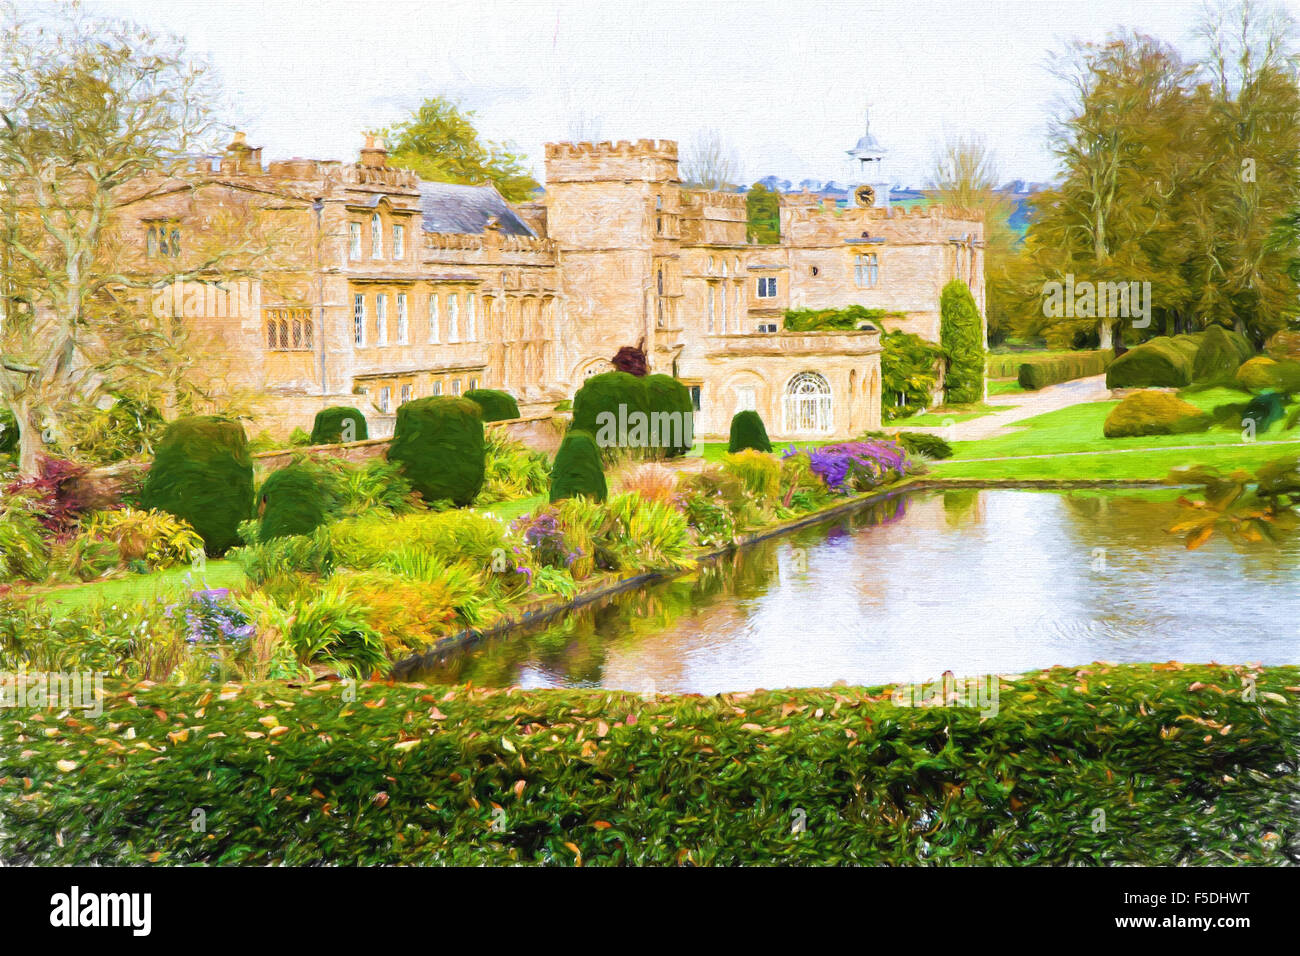 Forde Abbey Dorset England UK tourist attraction with gardens in autumn illustration like oil painting Stock Photo